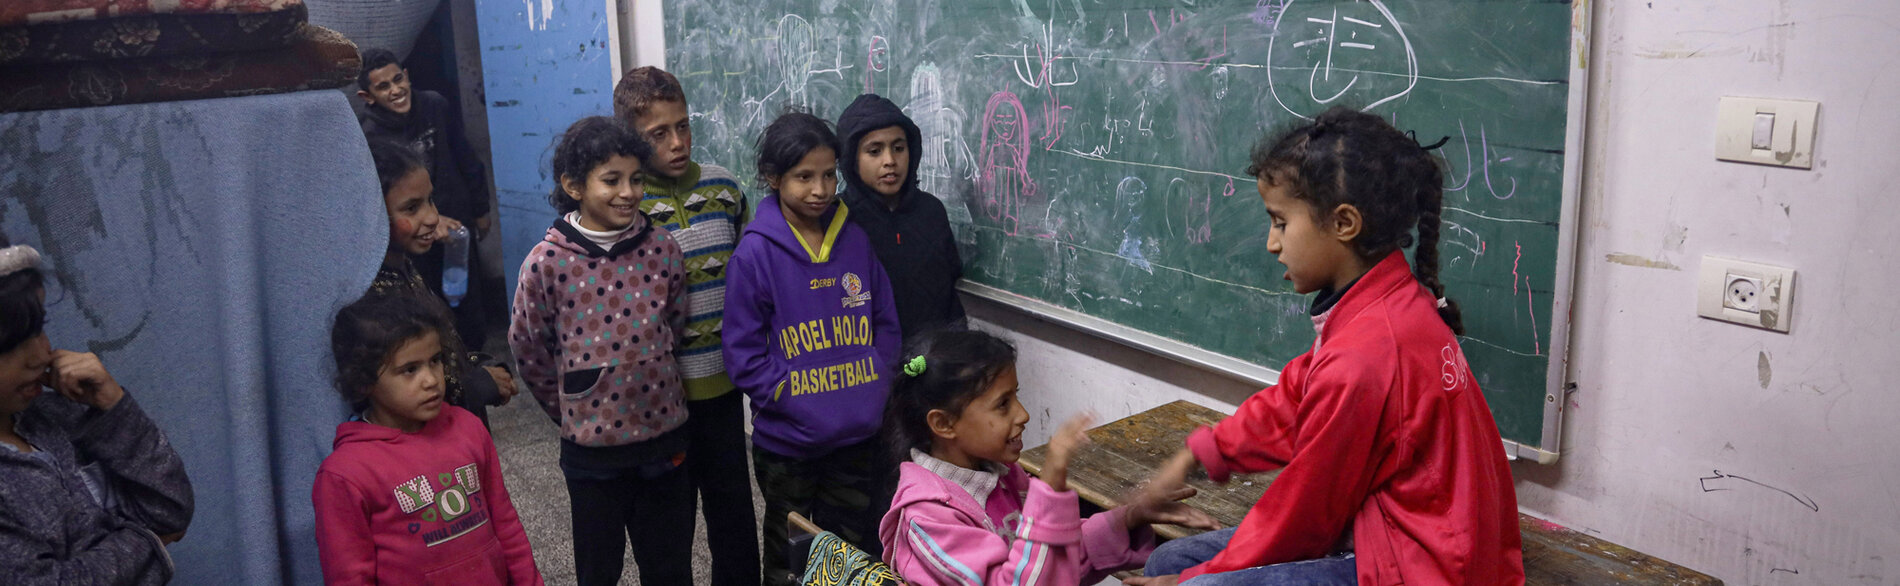 Children at a school used as a shelter for internally displaced persons in Rafah city. Photo by UNICEF/El Baba